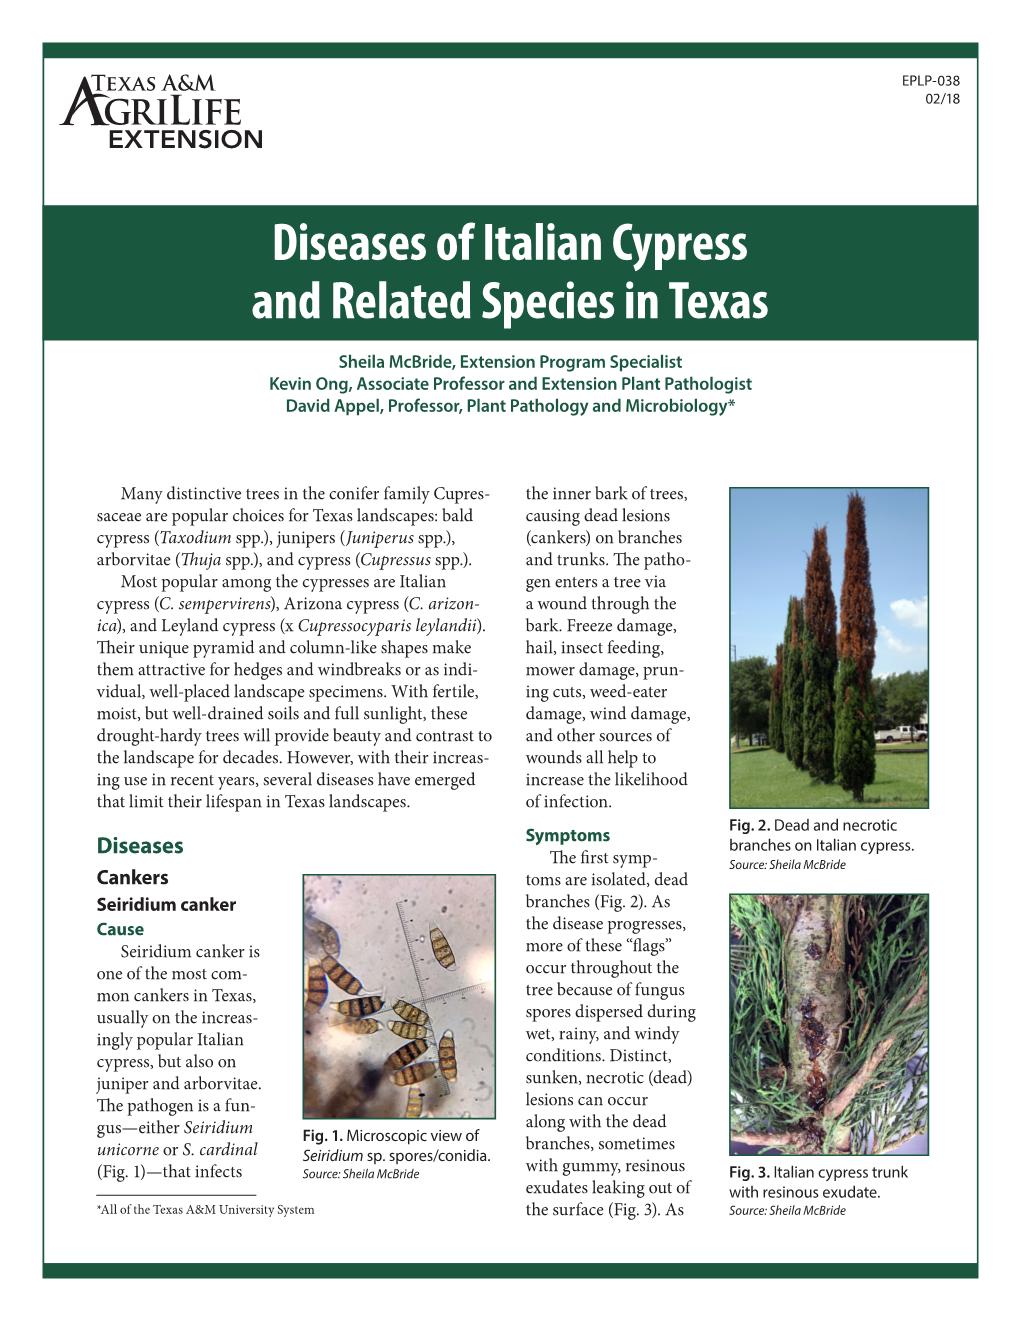 Diseases of Italian Cypress and Related Species in Texas